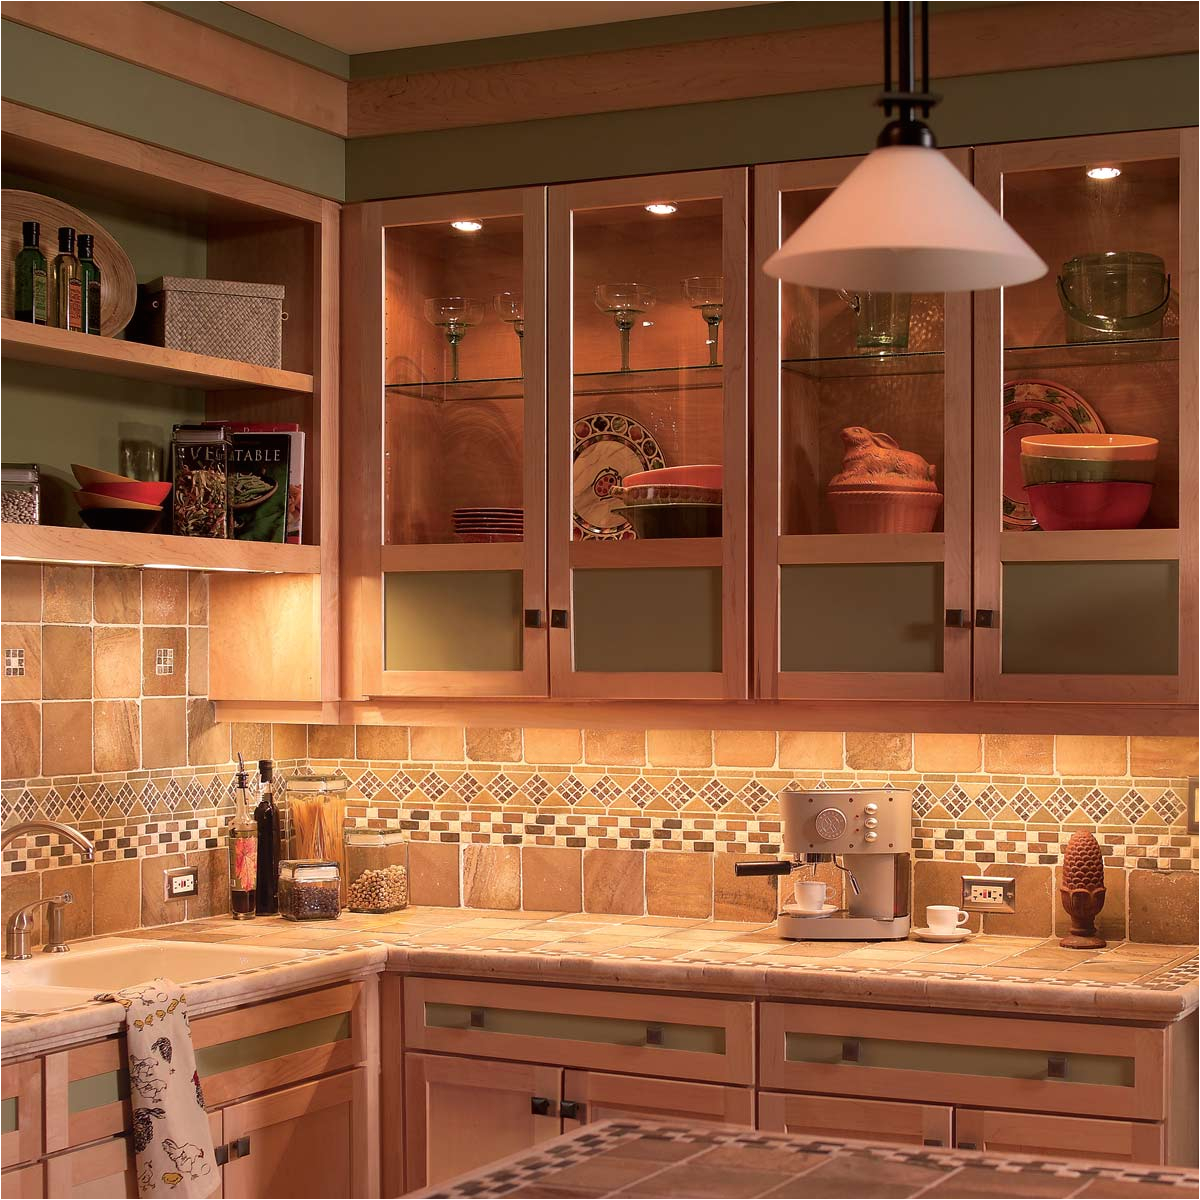 how to install under cabinet lighting in your kitchen under cabinet lighting wiring options add dramatic